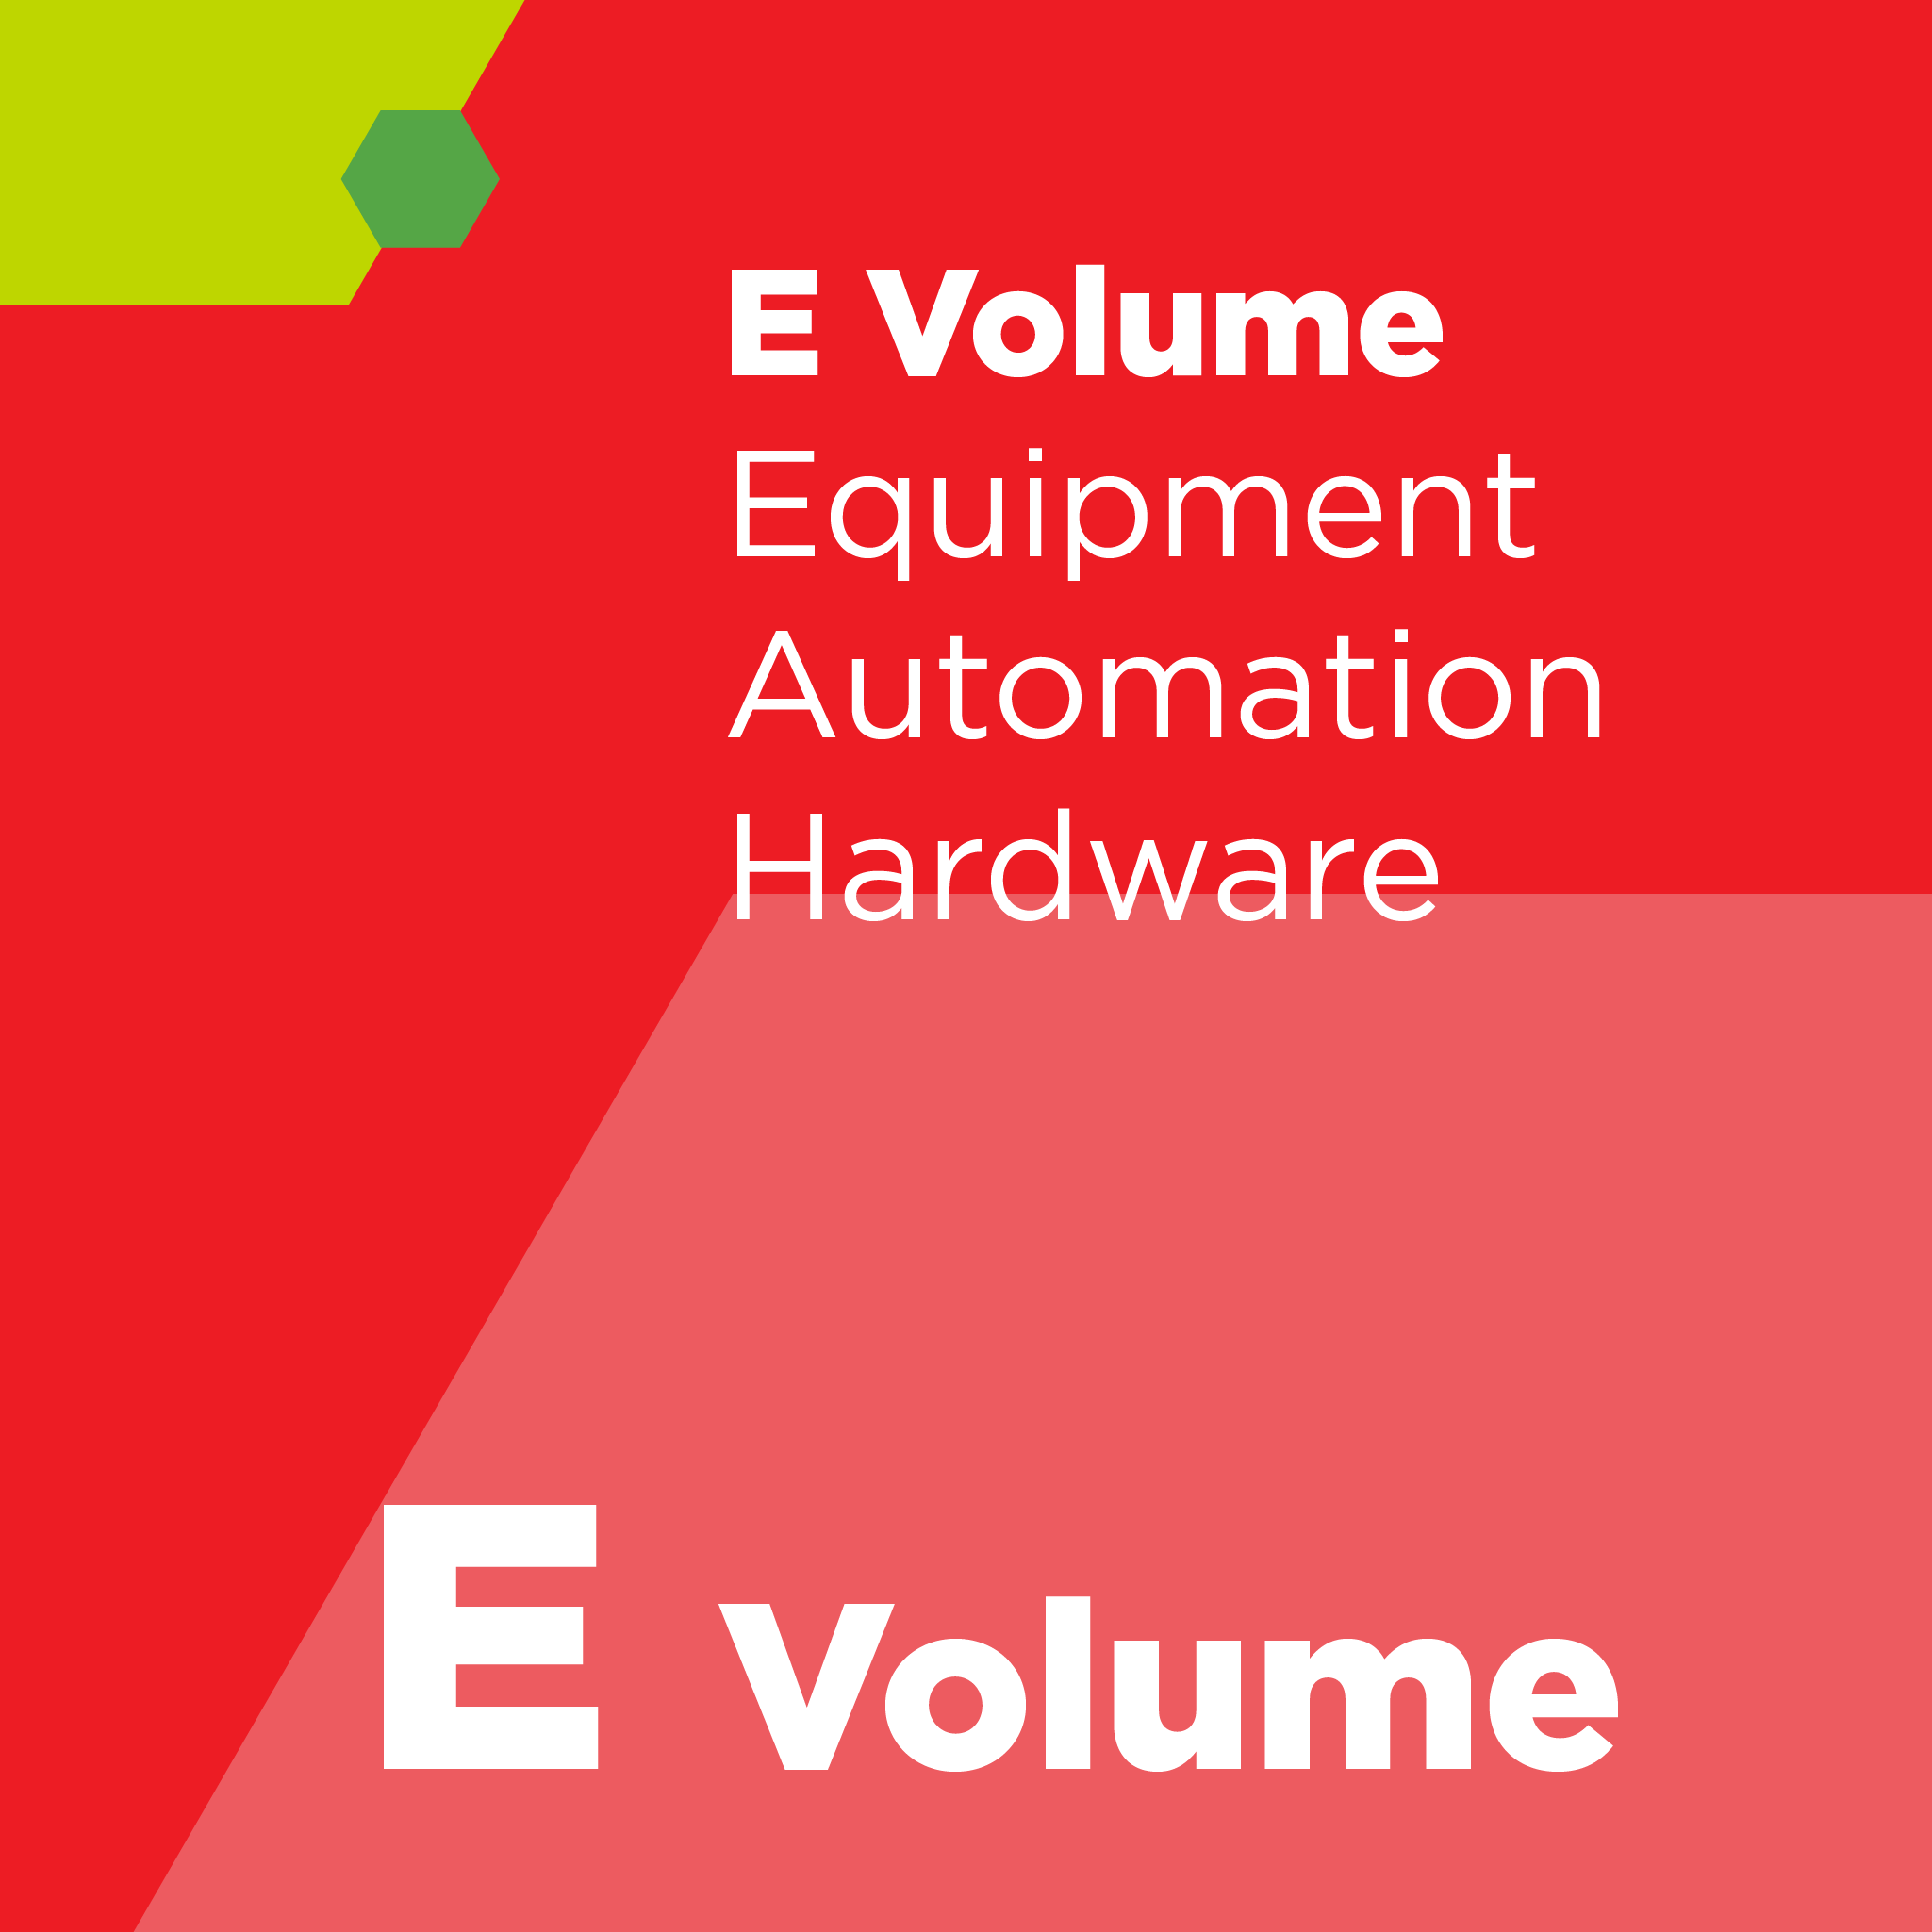 E01000 - SEMI E10 - Specification for Definition and Measurement of Equipment Reliability, Availability, and Maintainability (RAM) and Utilization